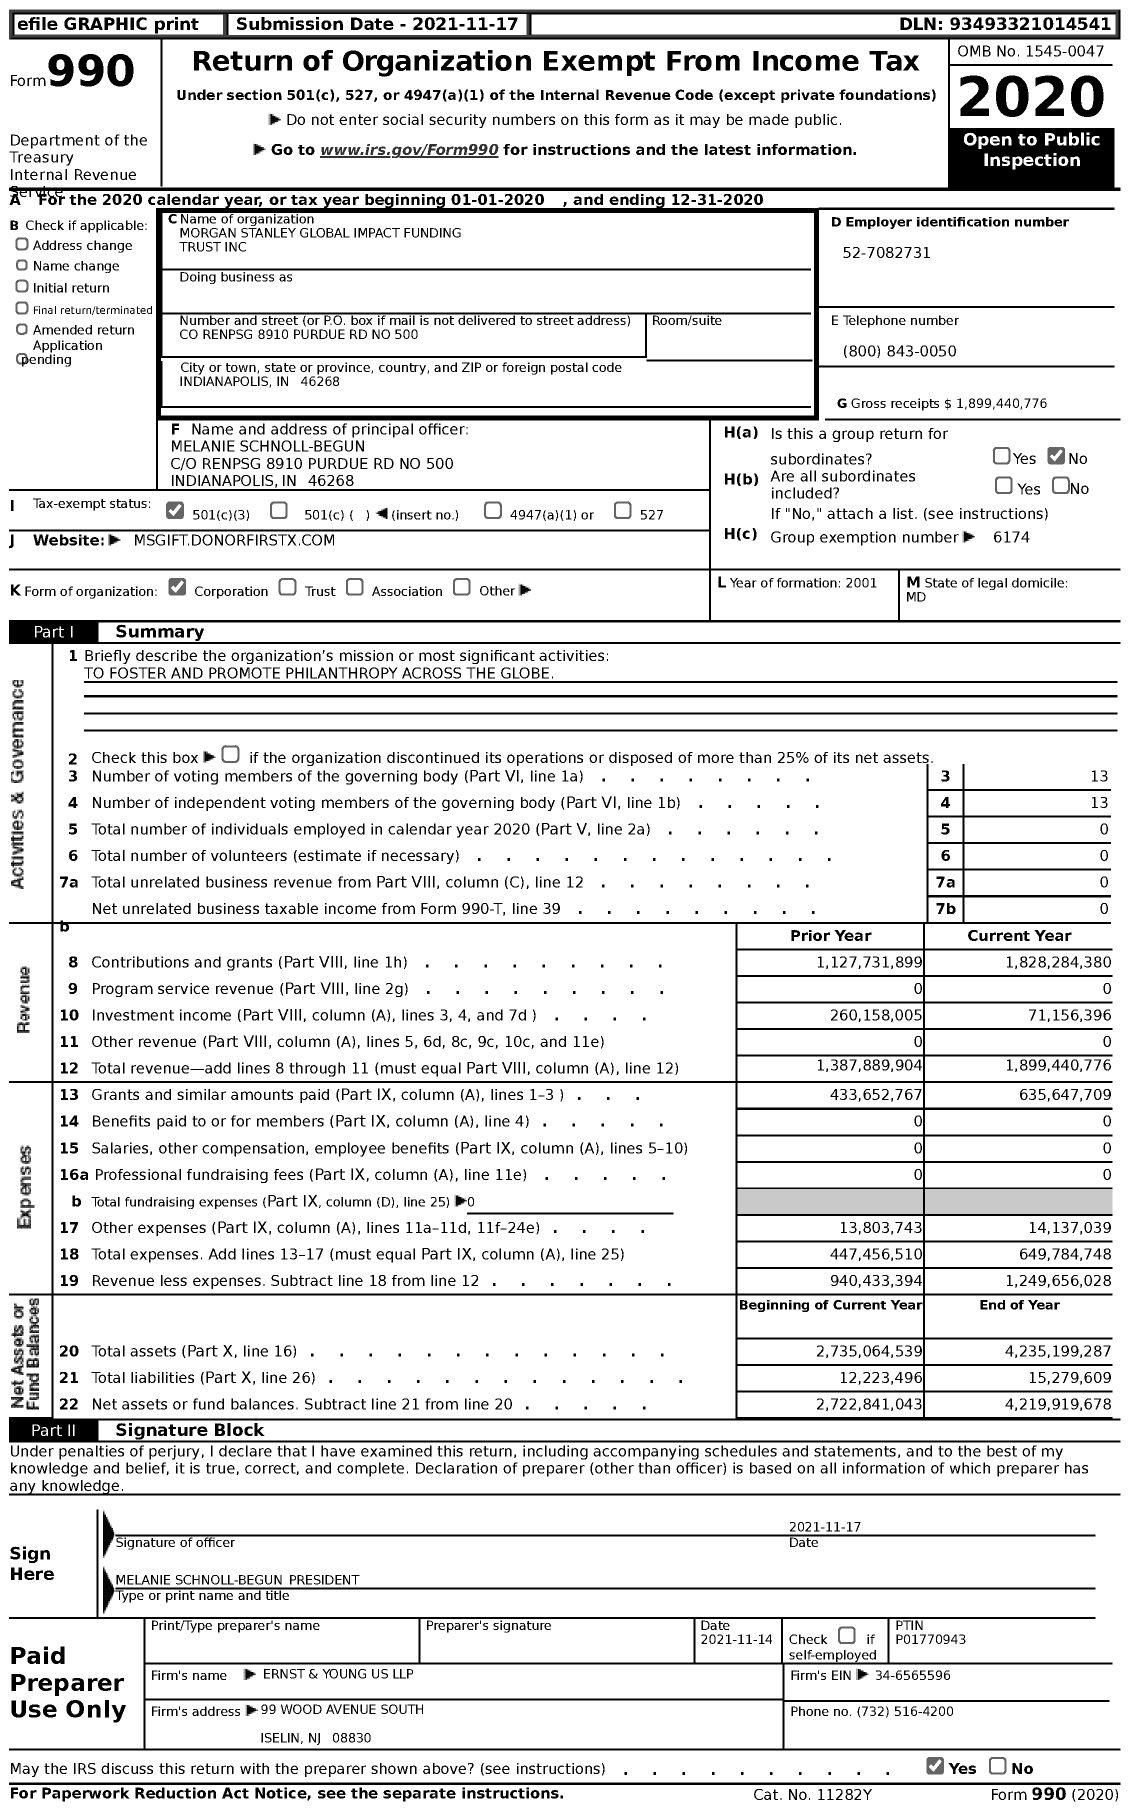 Image of first page of 2020 Form 990 for Morgan Stanley Global Impact Funding Trust